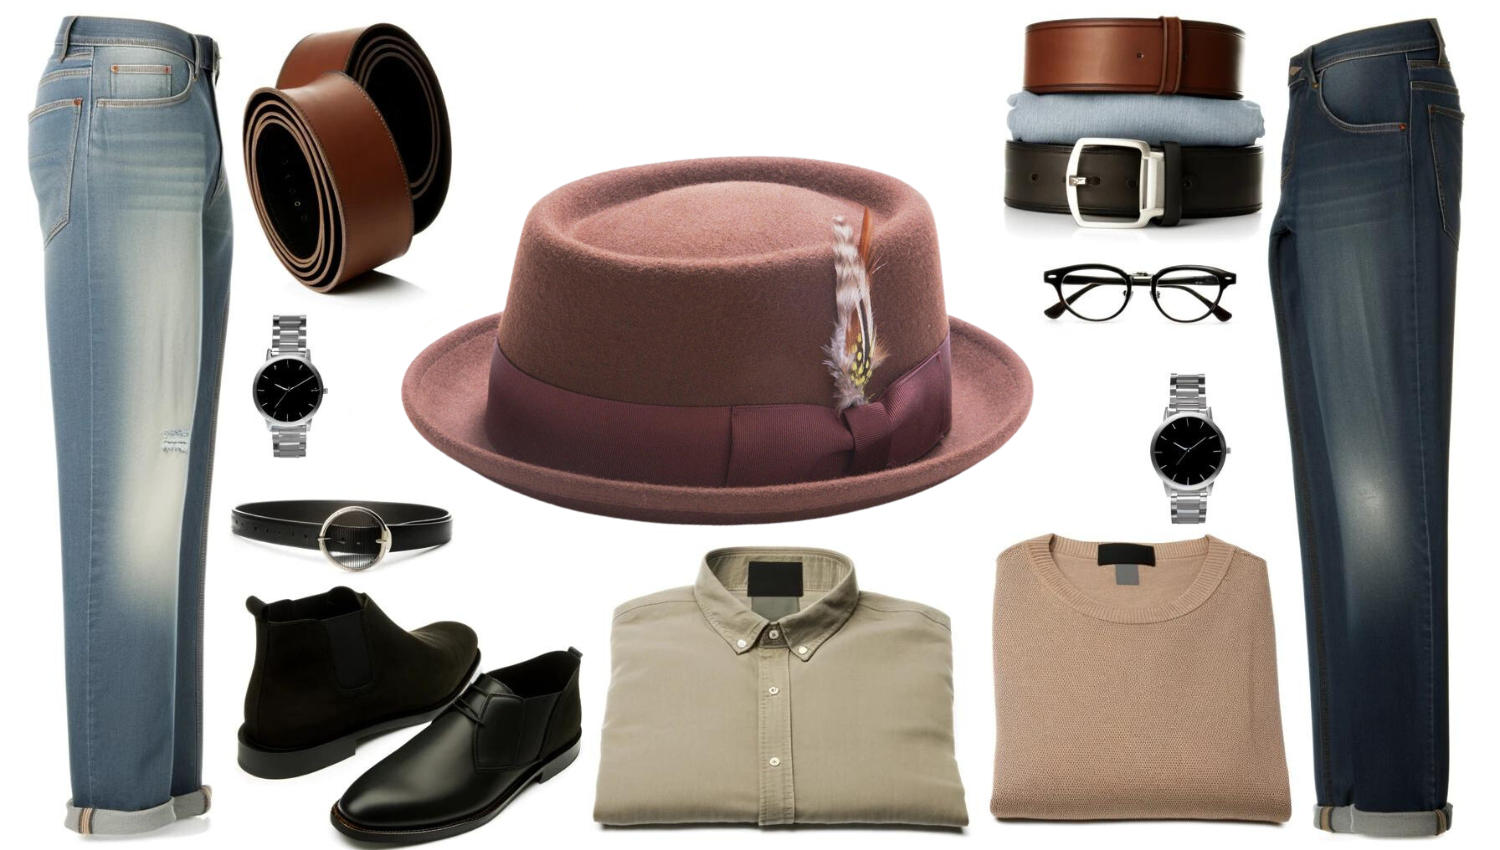 A collection of men's clothing and accessories is displayed. Items include two pairs of jeans, a brown pork pie hat, belts, a pair of black shoes, a pair of brown boots, two watches, a pair of glasses, a beige button-up shirt, and a beige sweater.